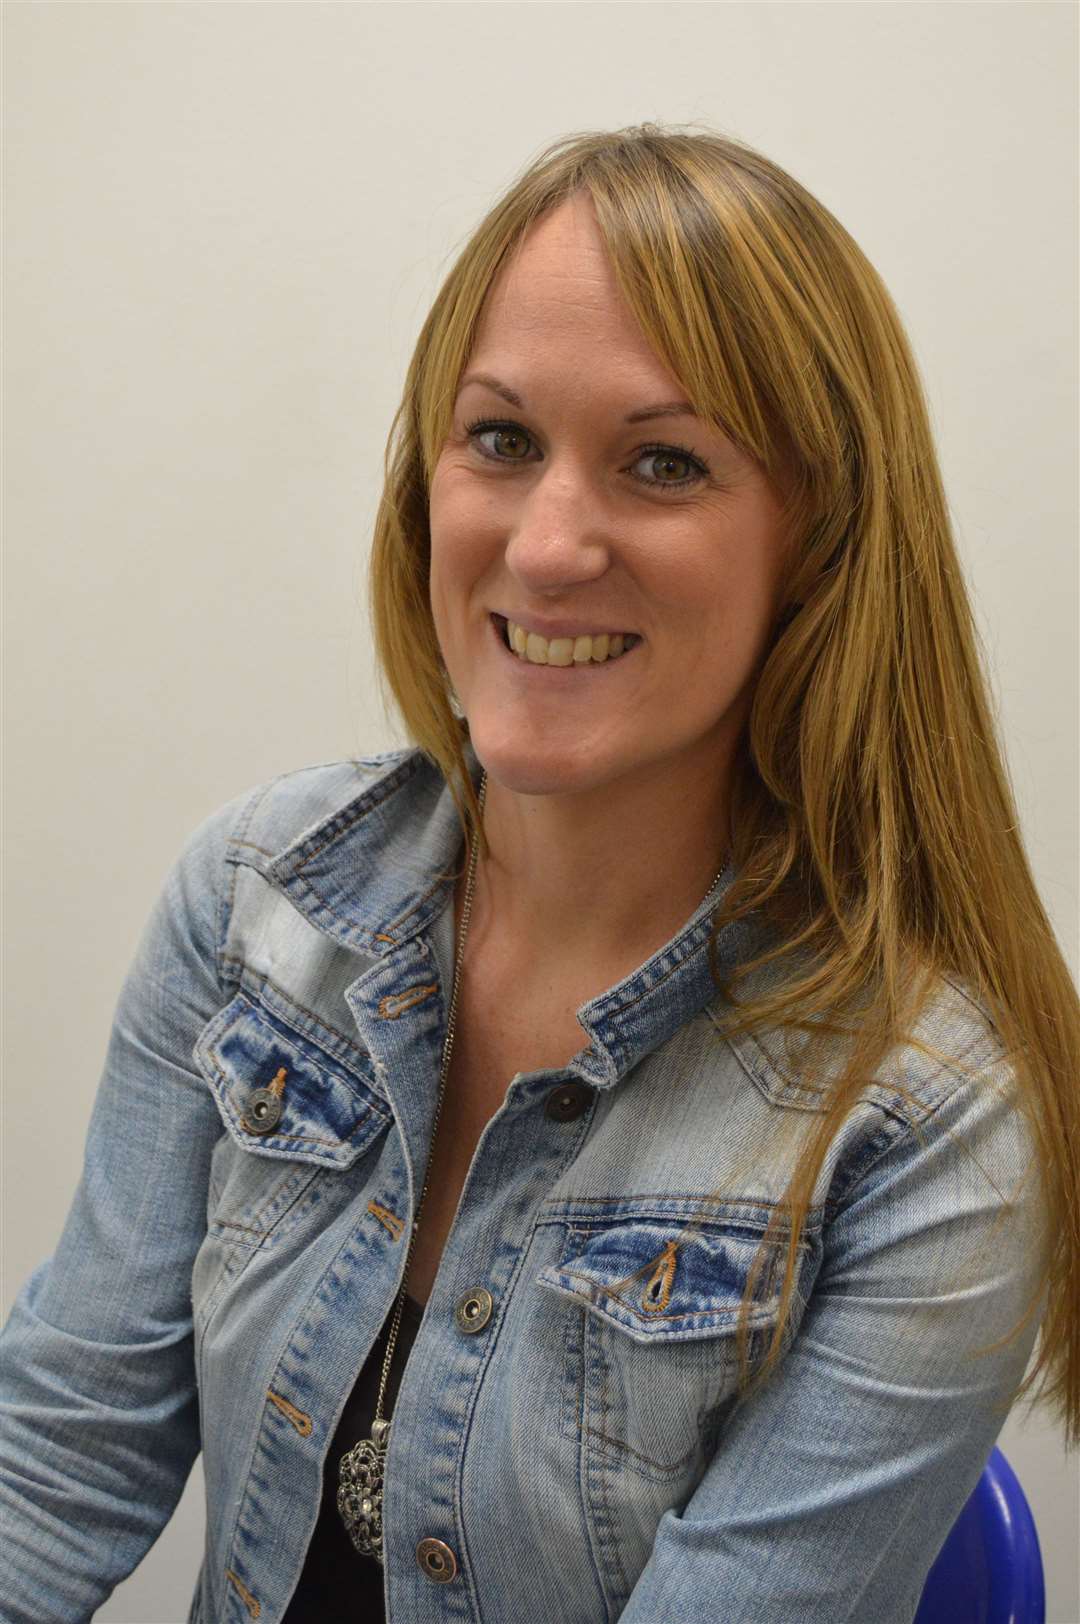 Testimonials are needed to help Goodwin Academy teacher Kirsty Gaythwaite win a silver after being shortlisted for the Outstanding New Teacher of the Year category of the Pearson National Teaching Awards.